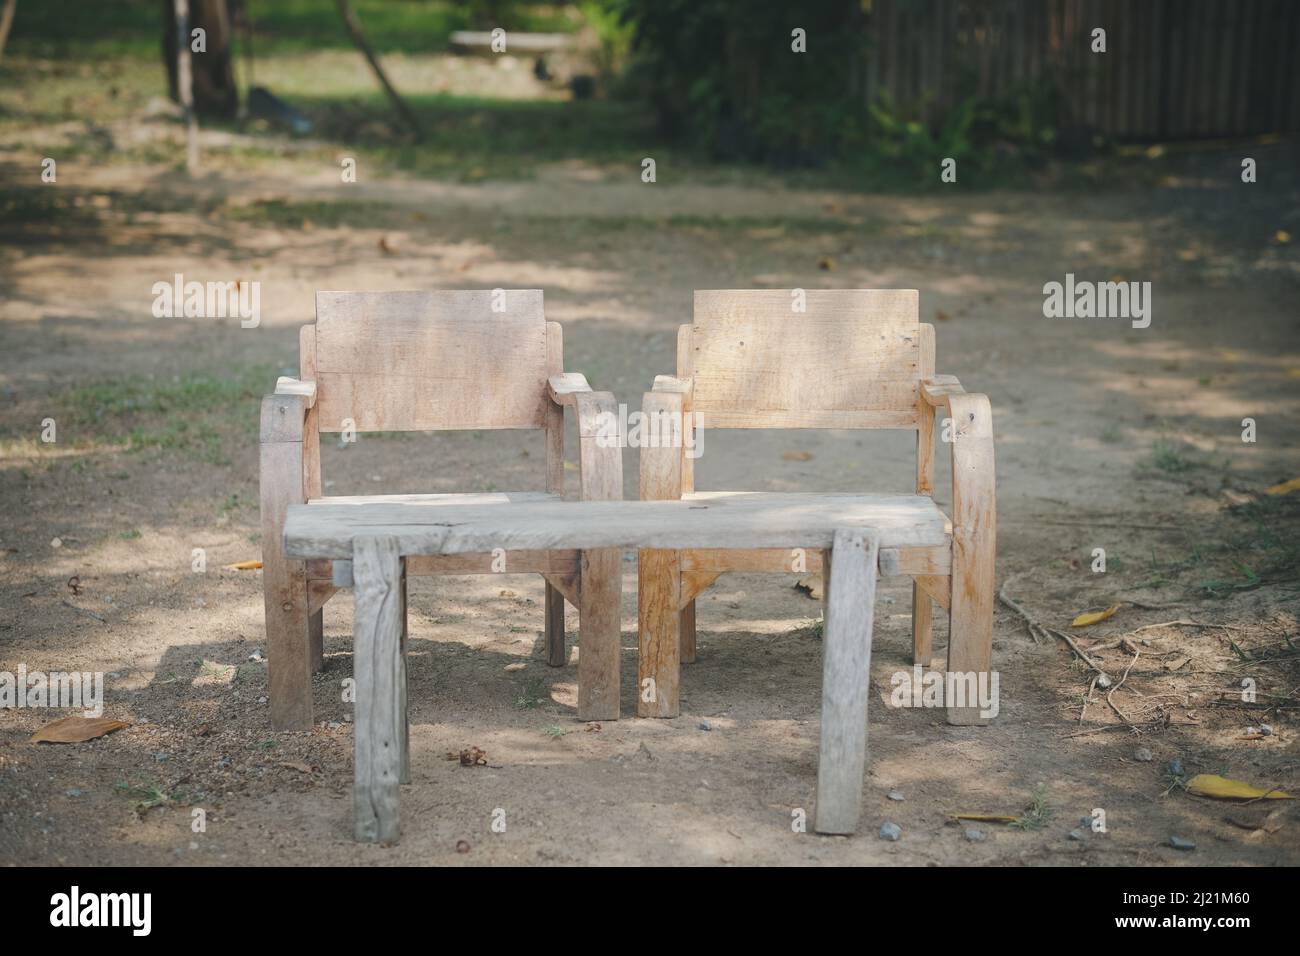 old wooden seat chair in garden park Stock Photo